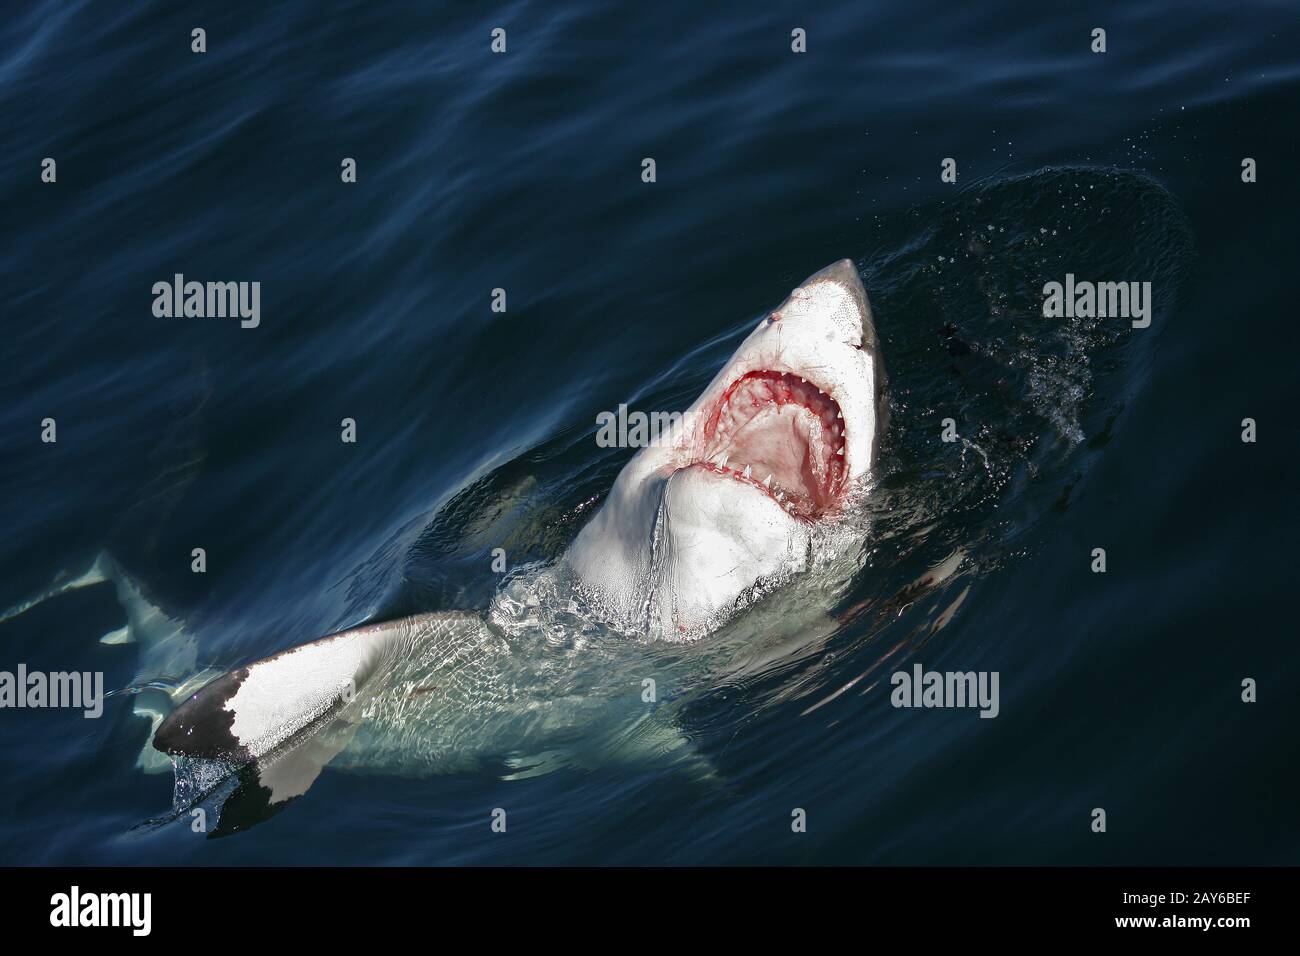 Great White Shark, carcharodon carcharias, Head of Adult at Surface, Open Mouth, False Bay in South Africa Stock Photo